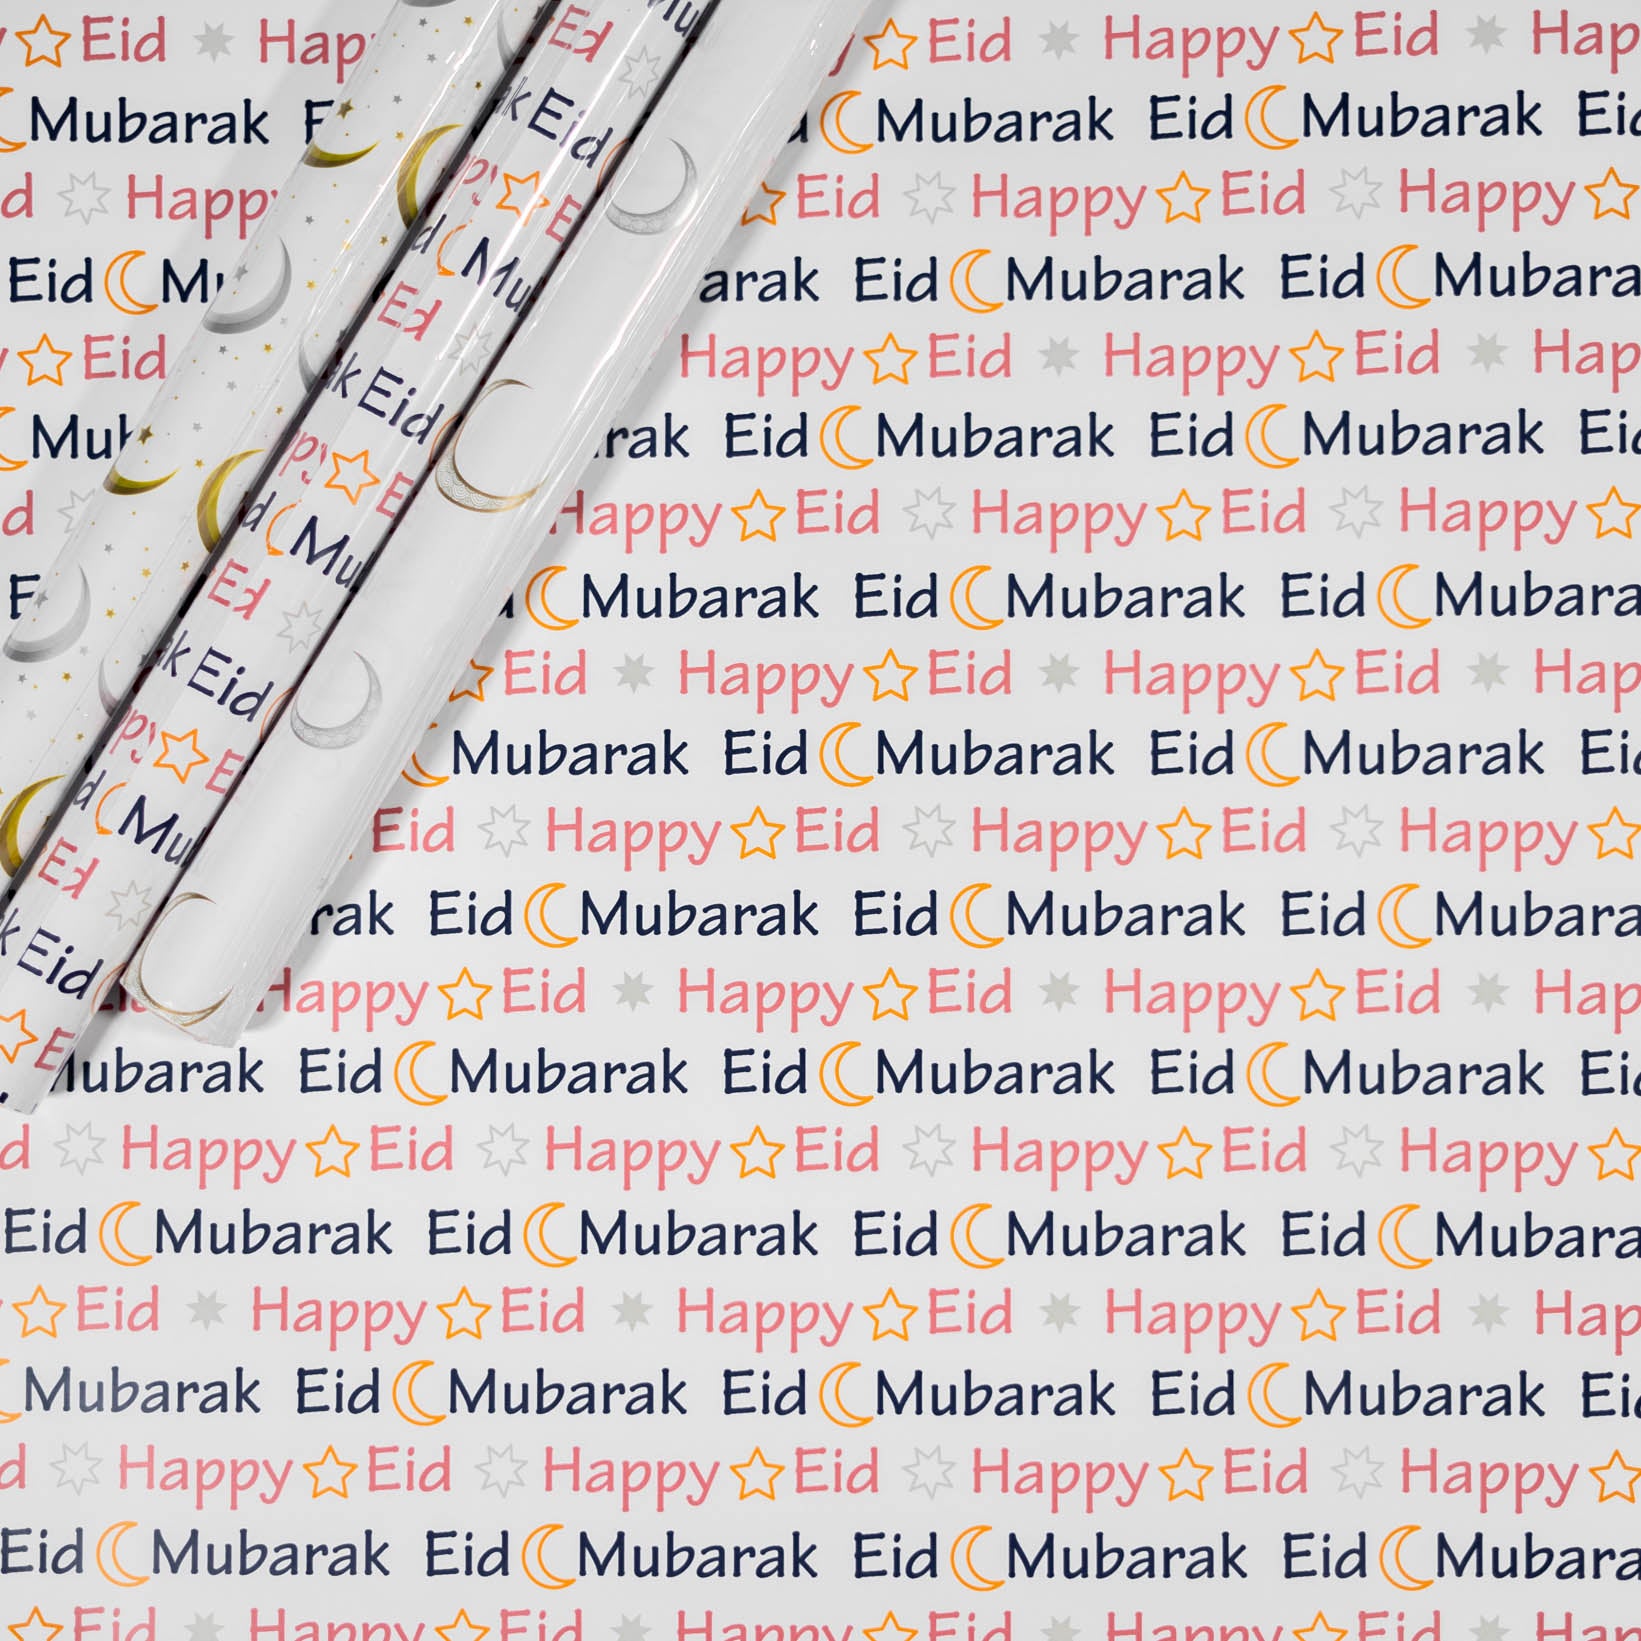 Eid Gift Wrapping Paper (Kids Happy Eid)